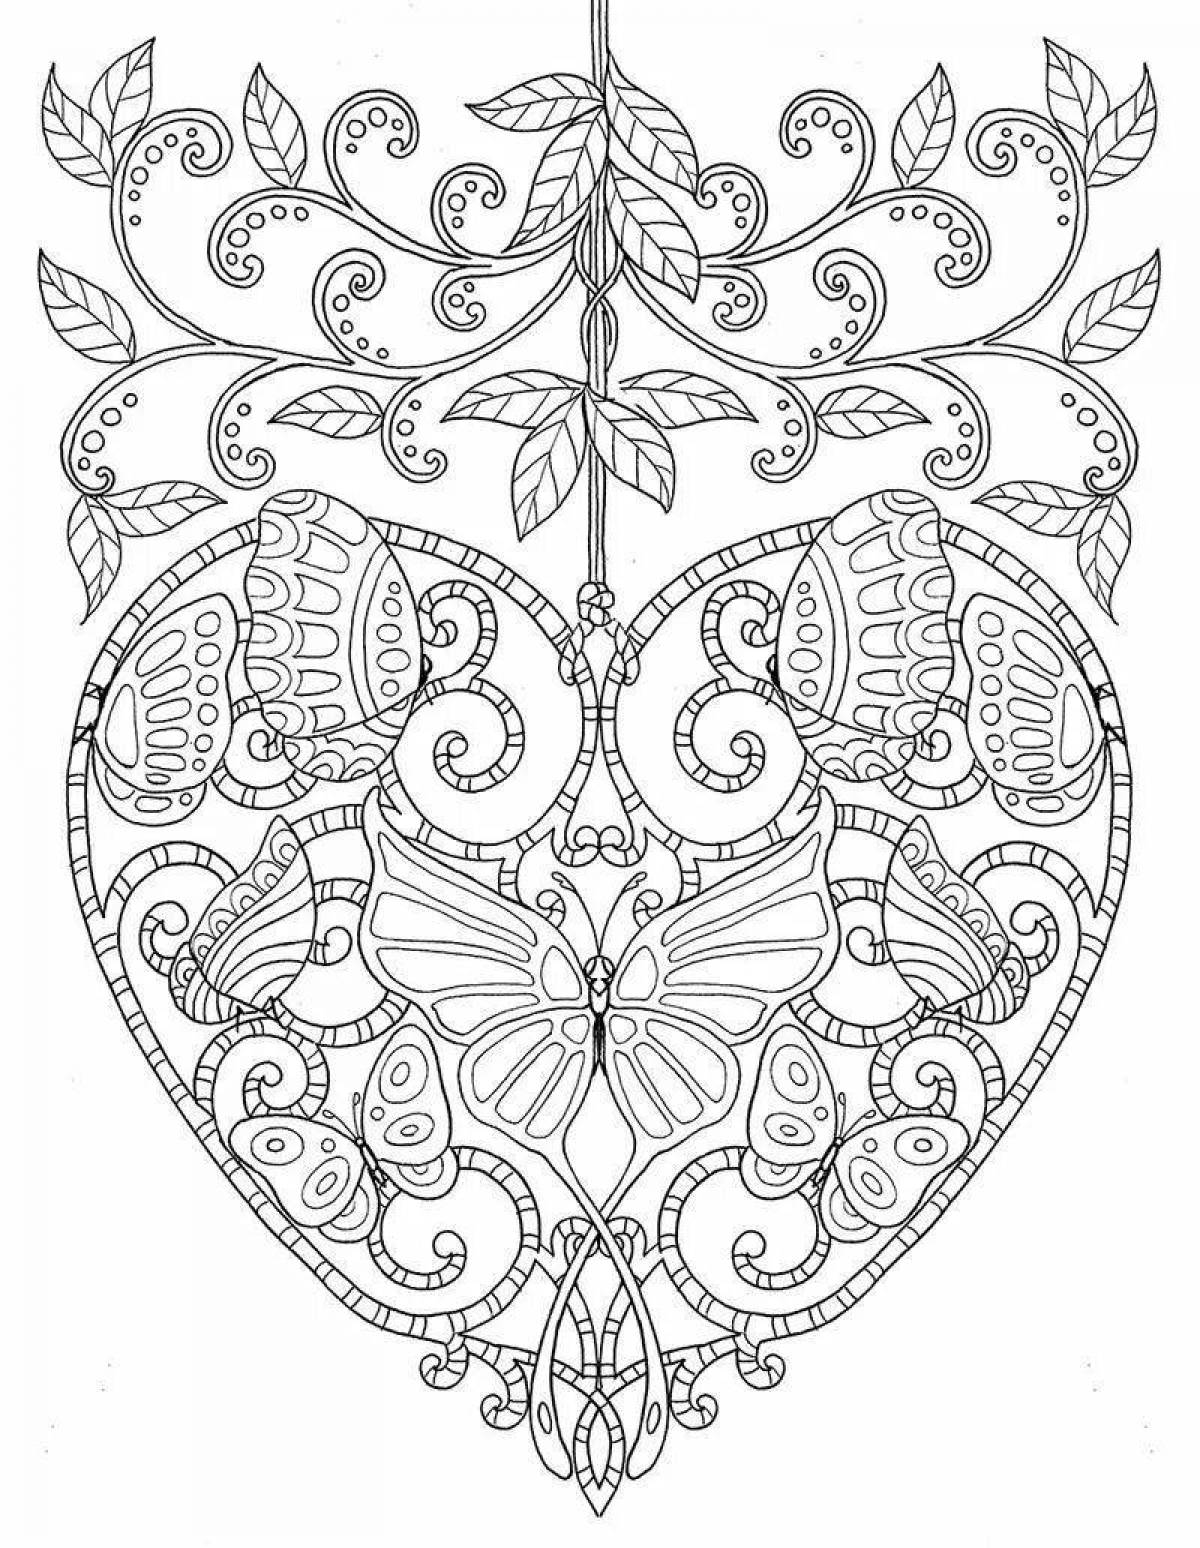 Charming heart antistress coloring book